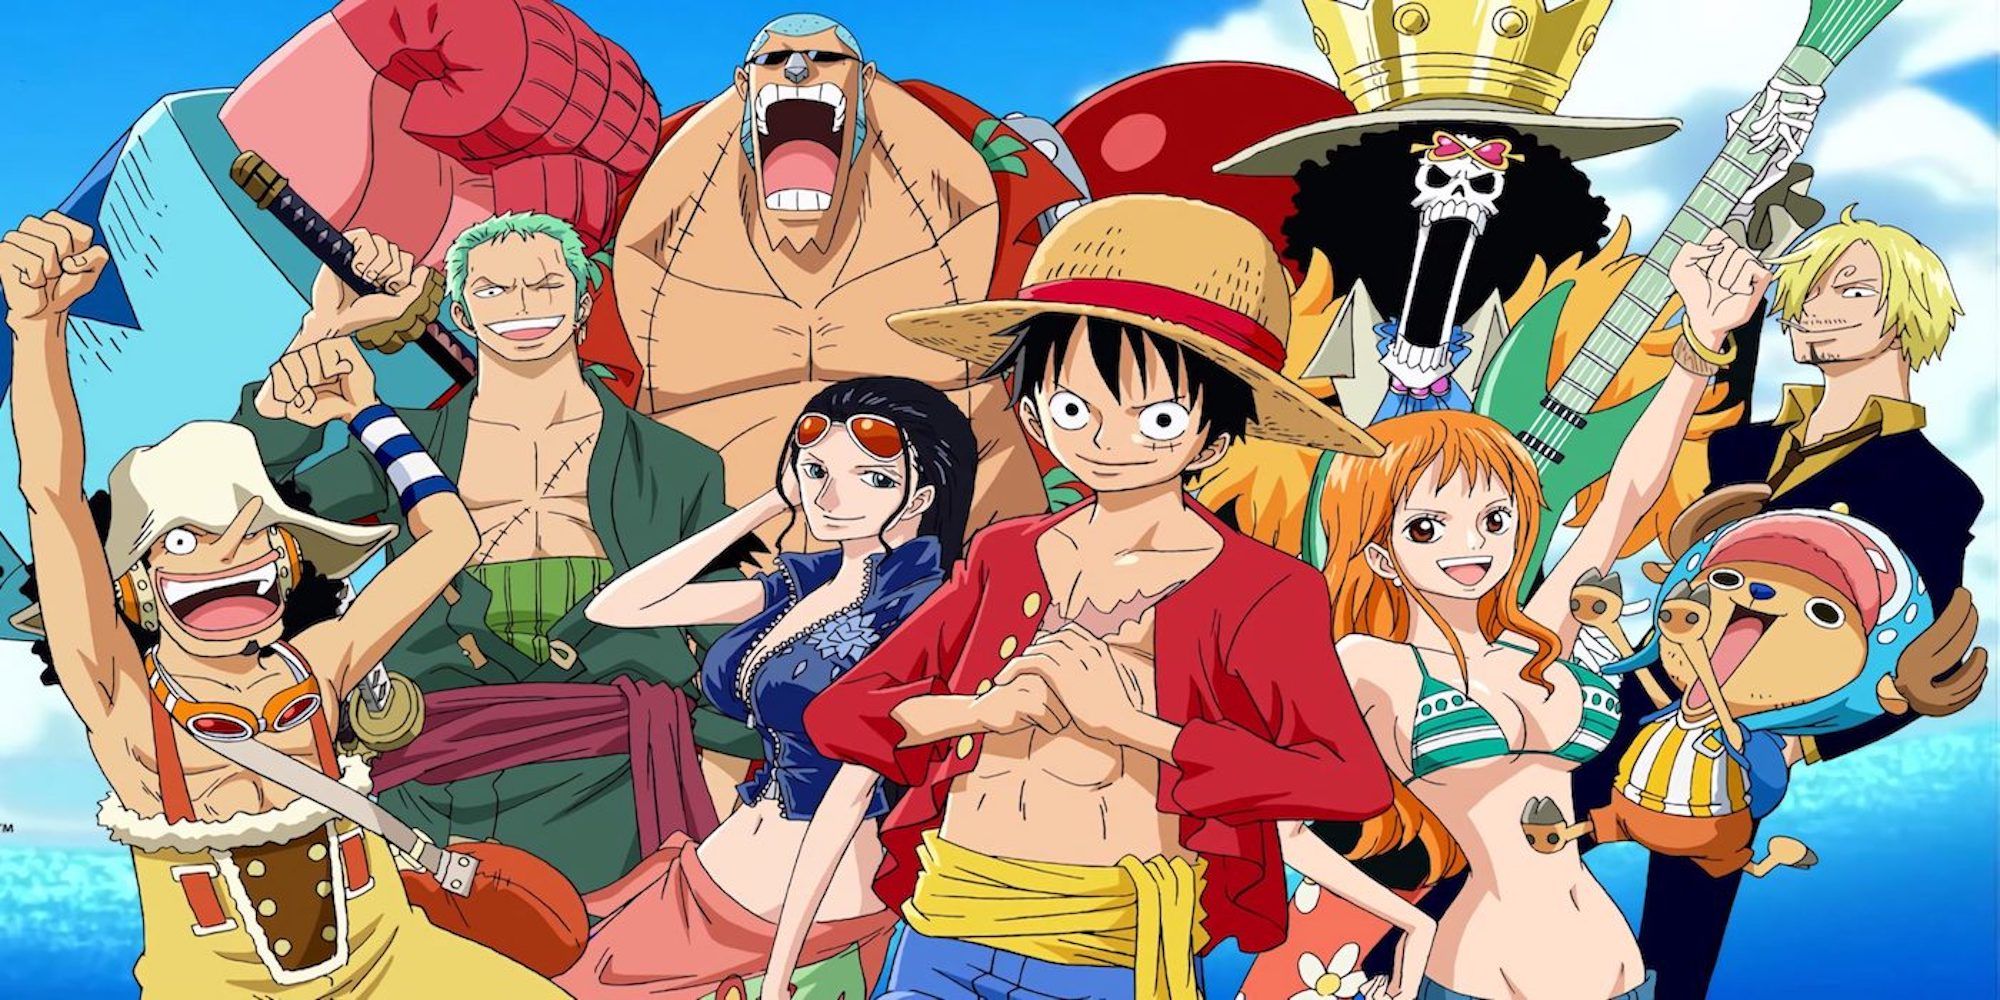 Promo art featuring characters in One Piece